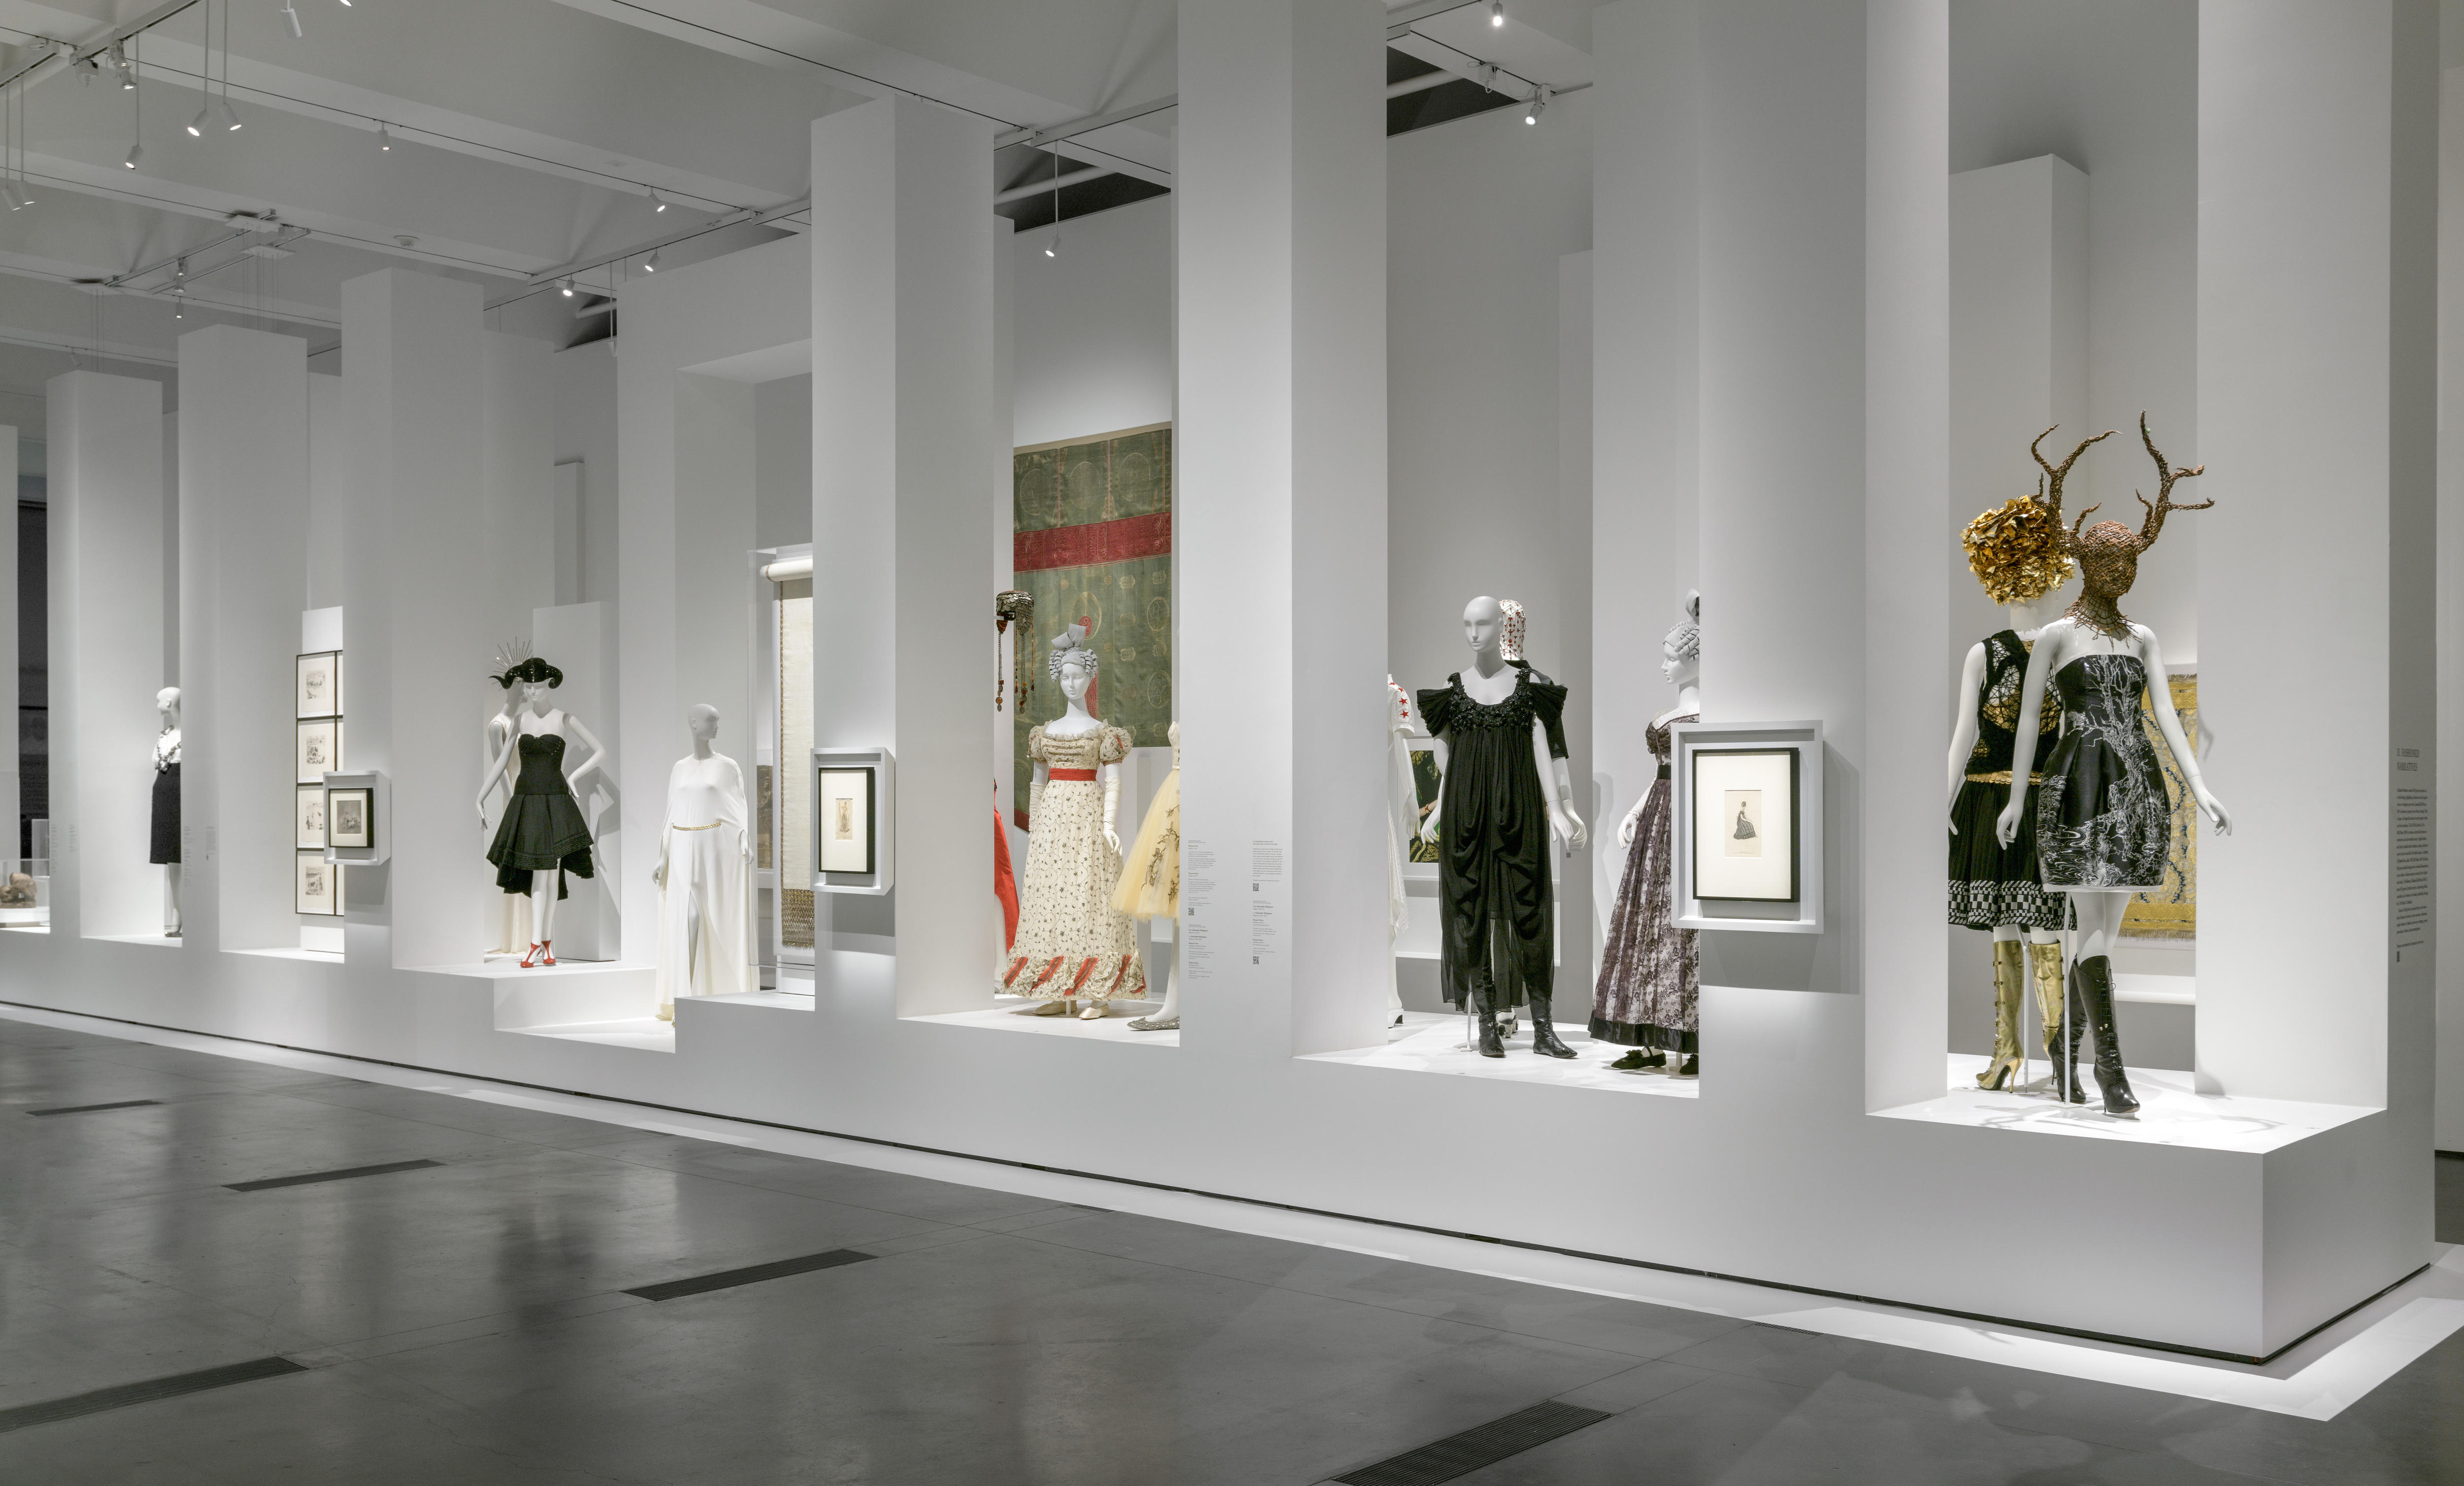 In a gallery space are a number of mannequins, wearing extravagant dresses, boots and headpieces